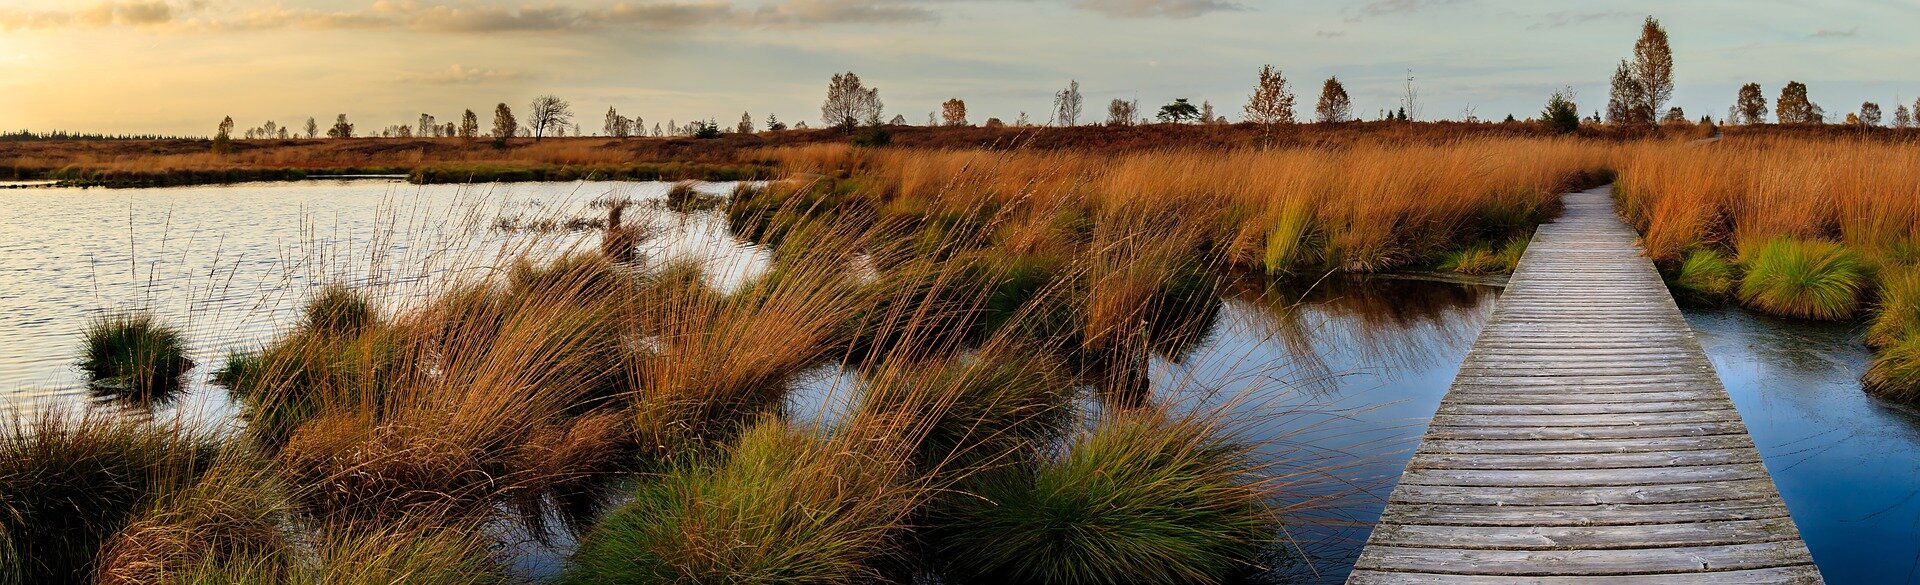 Land-building marsh plants are champions of CO2 capture